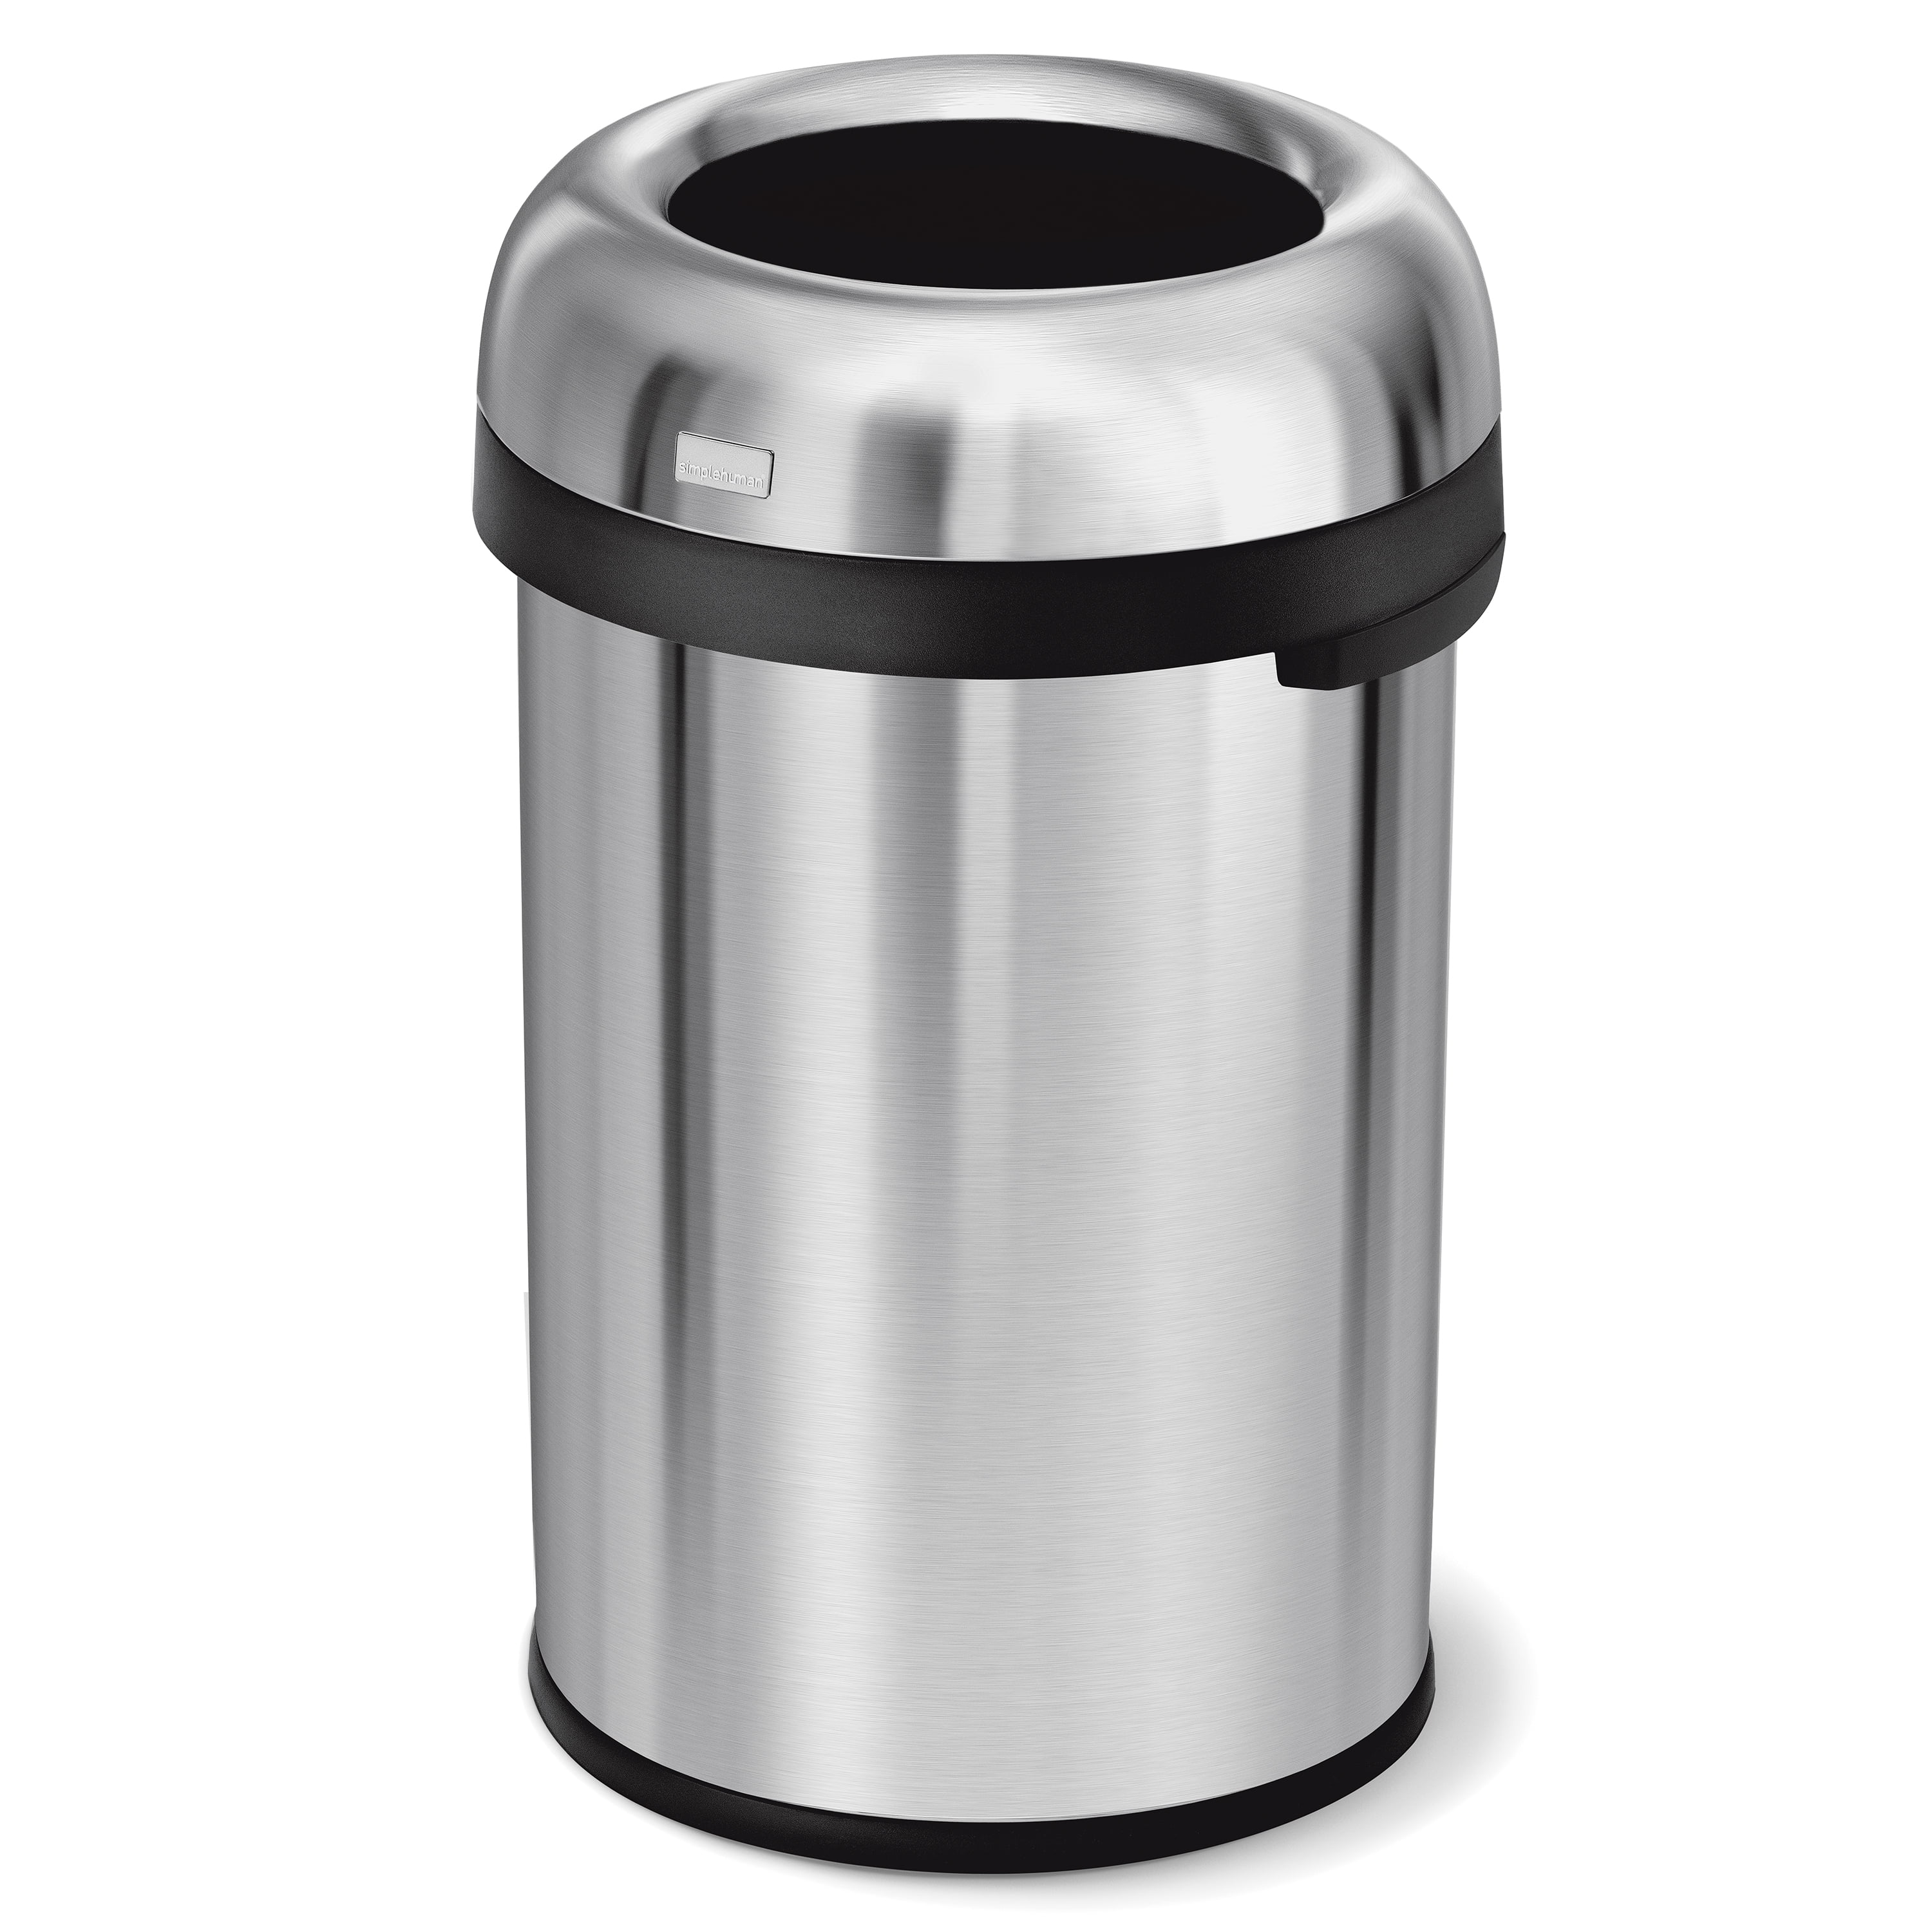 simplehuman 115 Liter / 30 Gallon Bullet Open Top Trash Can, Commercial Commercial Stainless Steel Garbage Cans